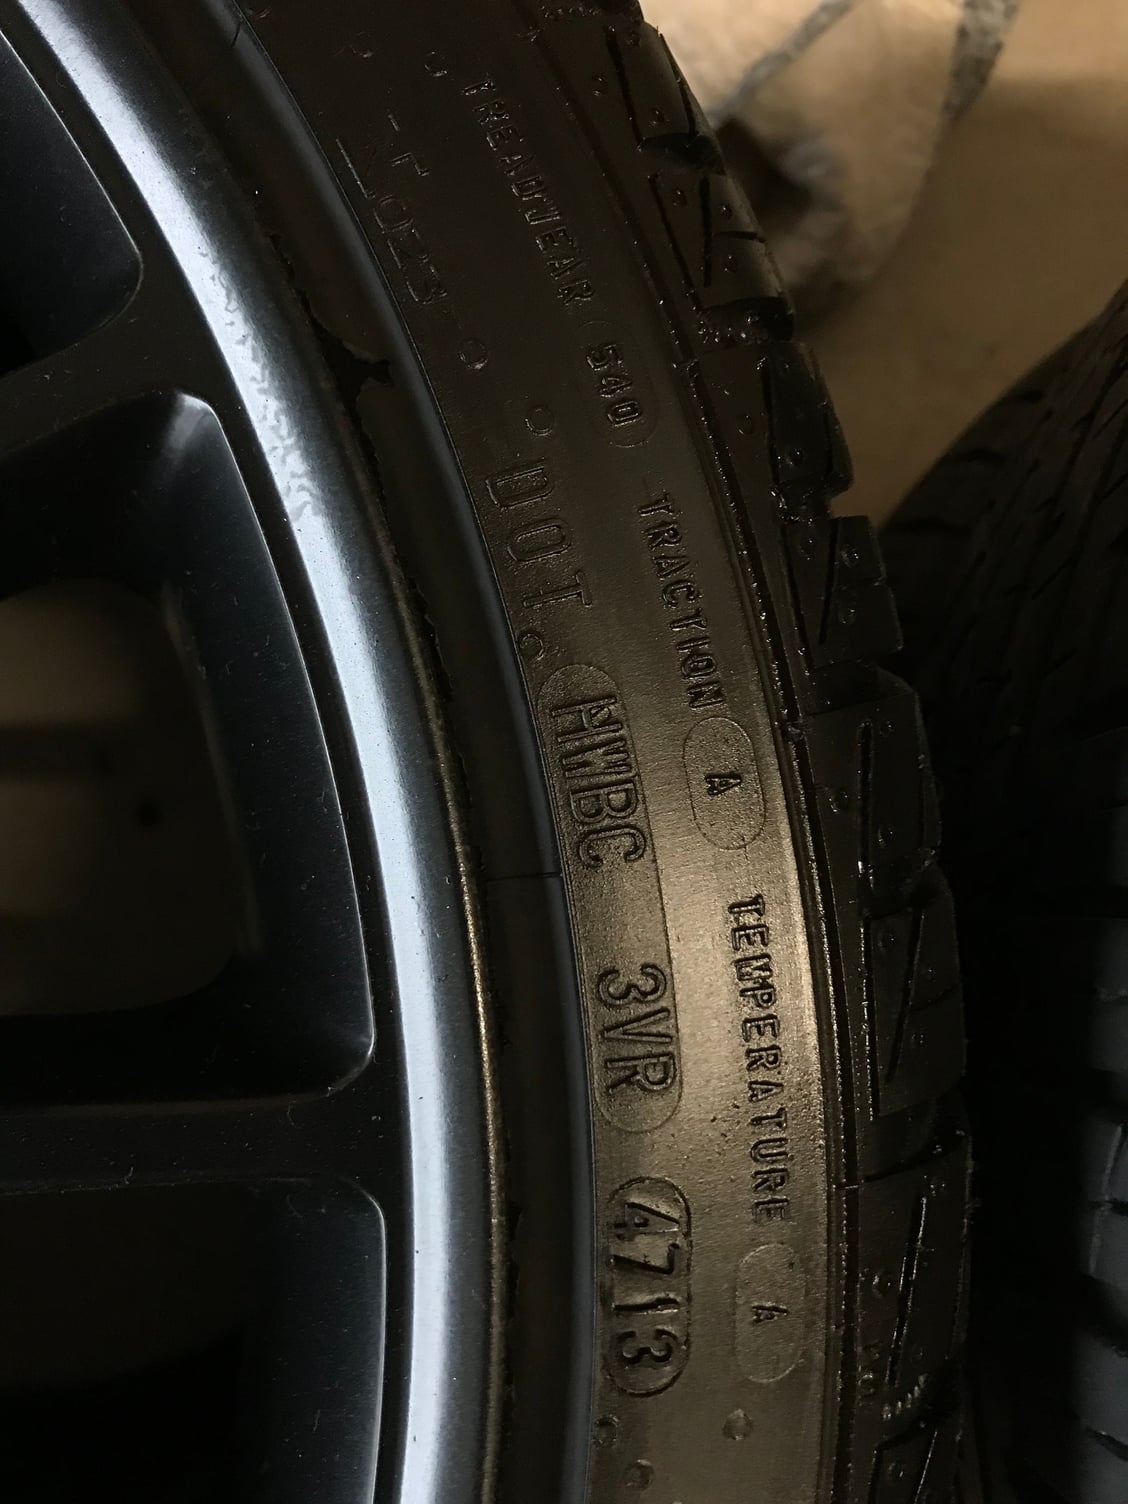 Wheels and Tires/Axles - W205 C63 Replicas w/Tires - Used - All Years Mercedes-Benz C63 AMG - All Years Mercedes-Benz C300 - Mechanicsville, VA 23116, United States